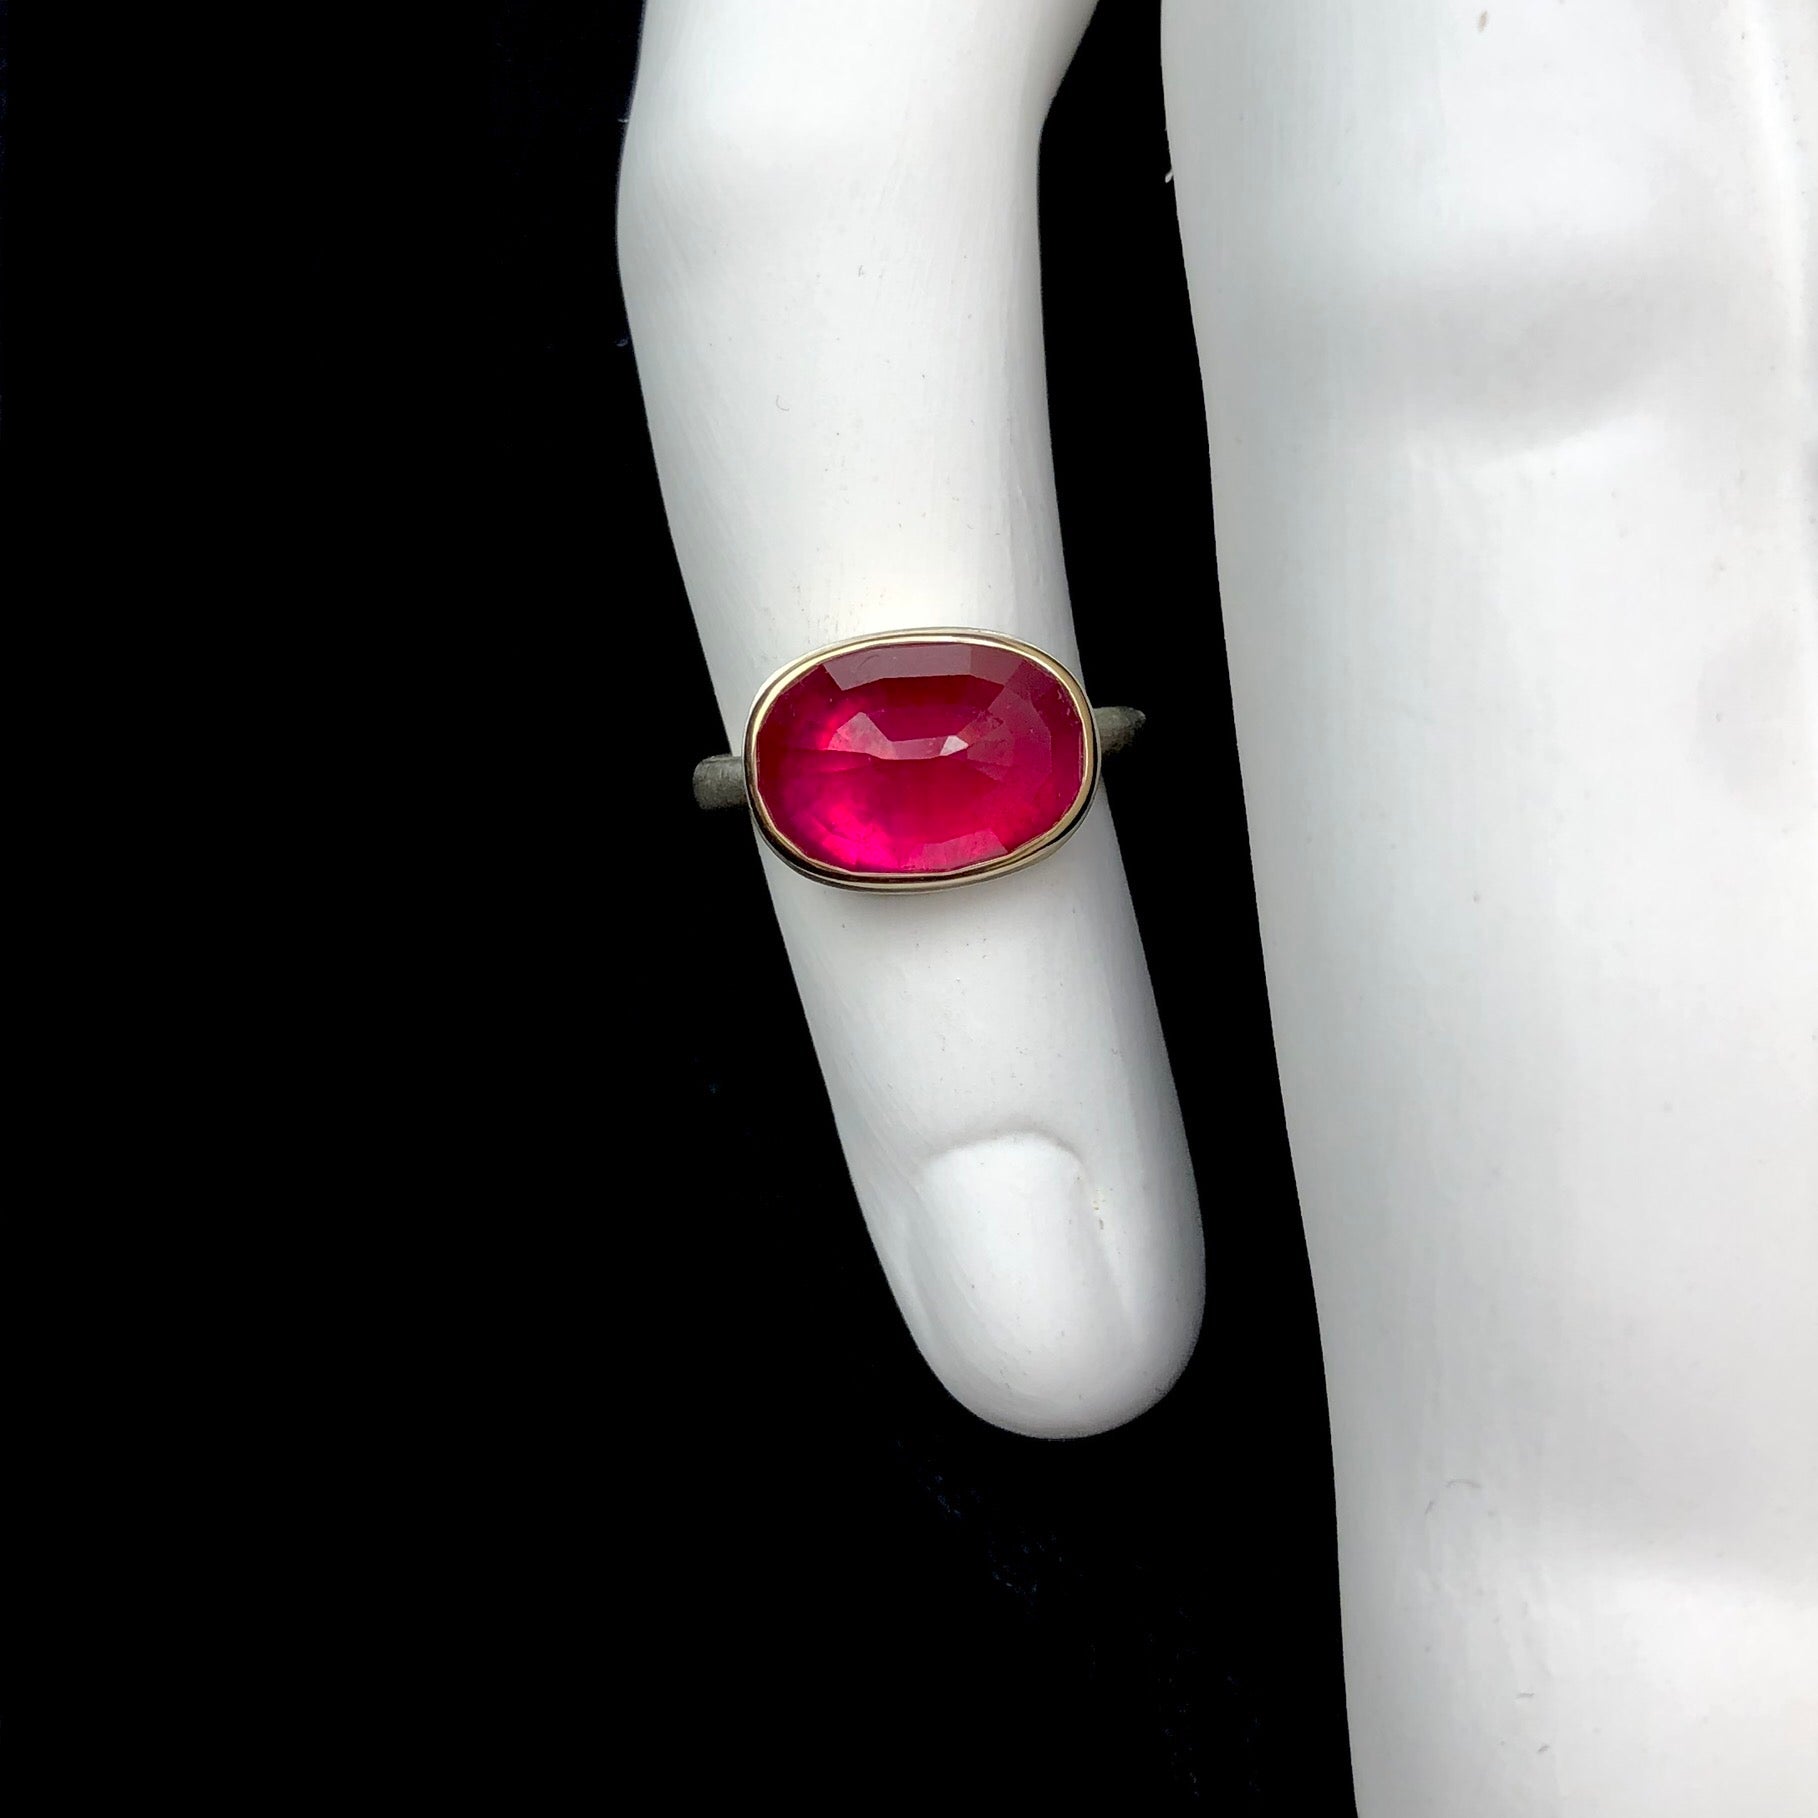 Top view of oval shaped pink/red colored ruby ring shown on white ceramic finger